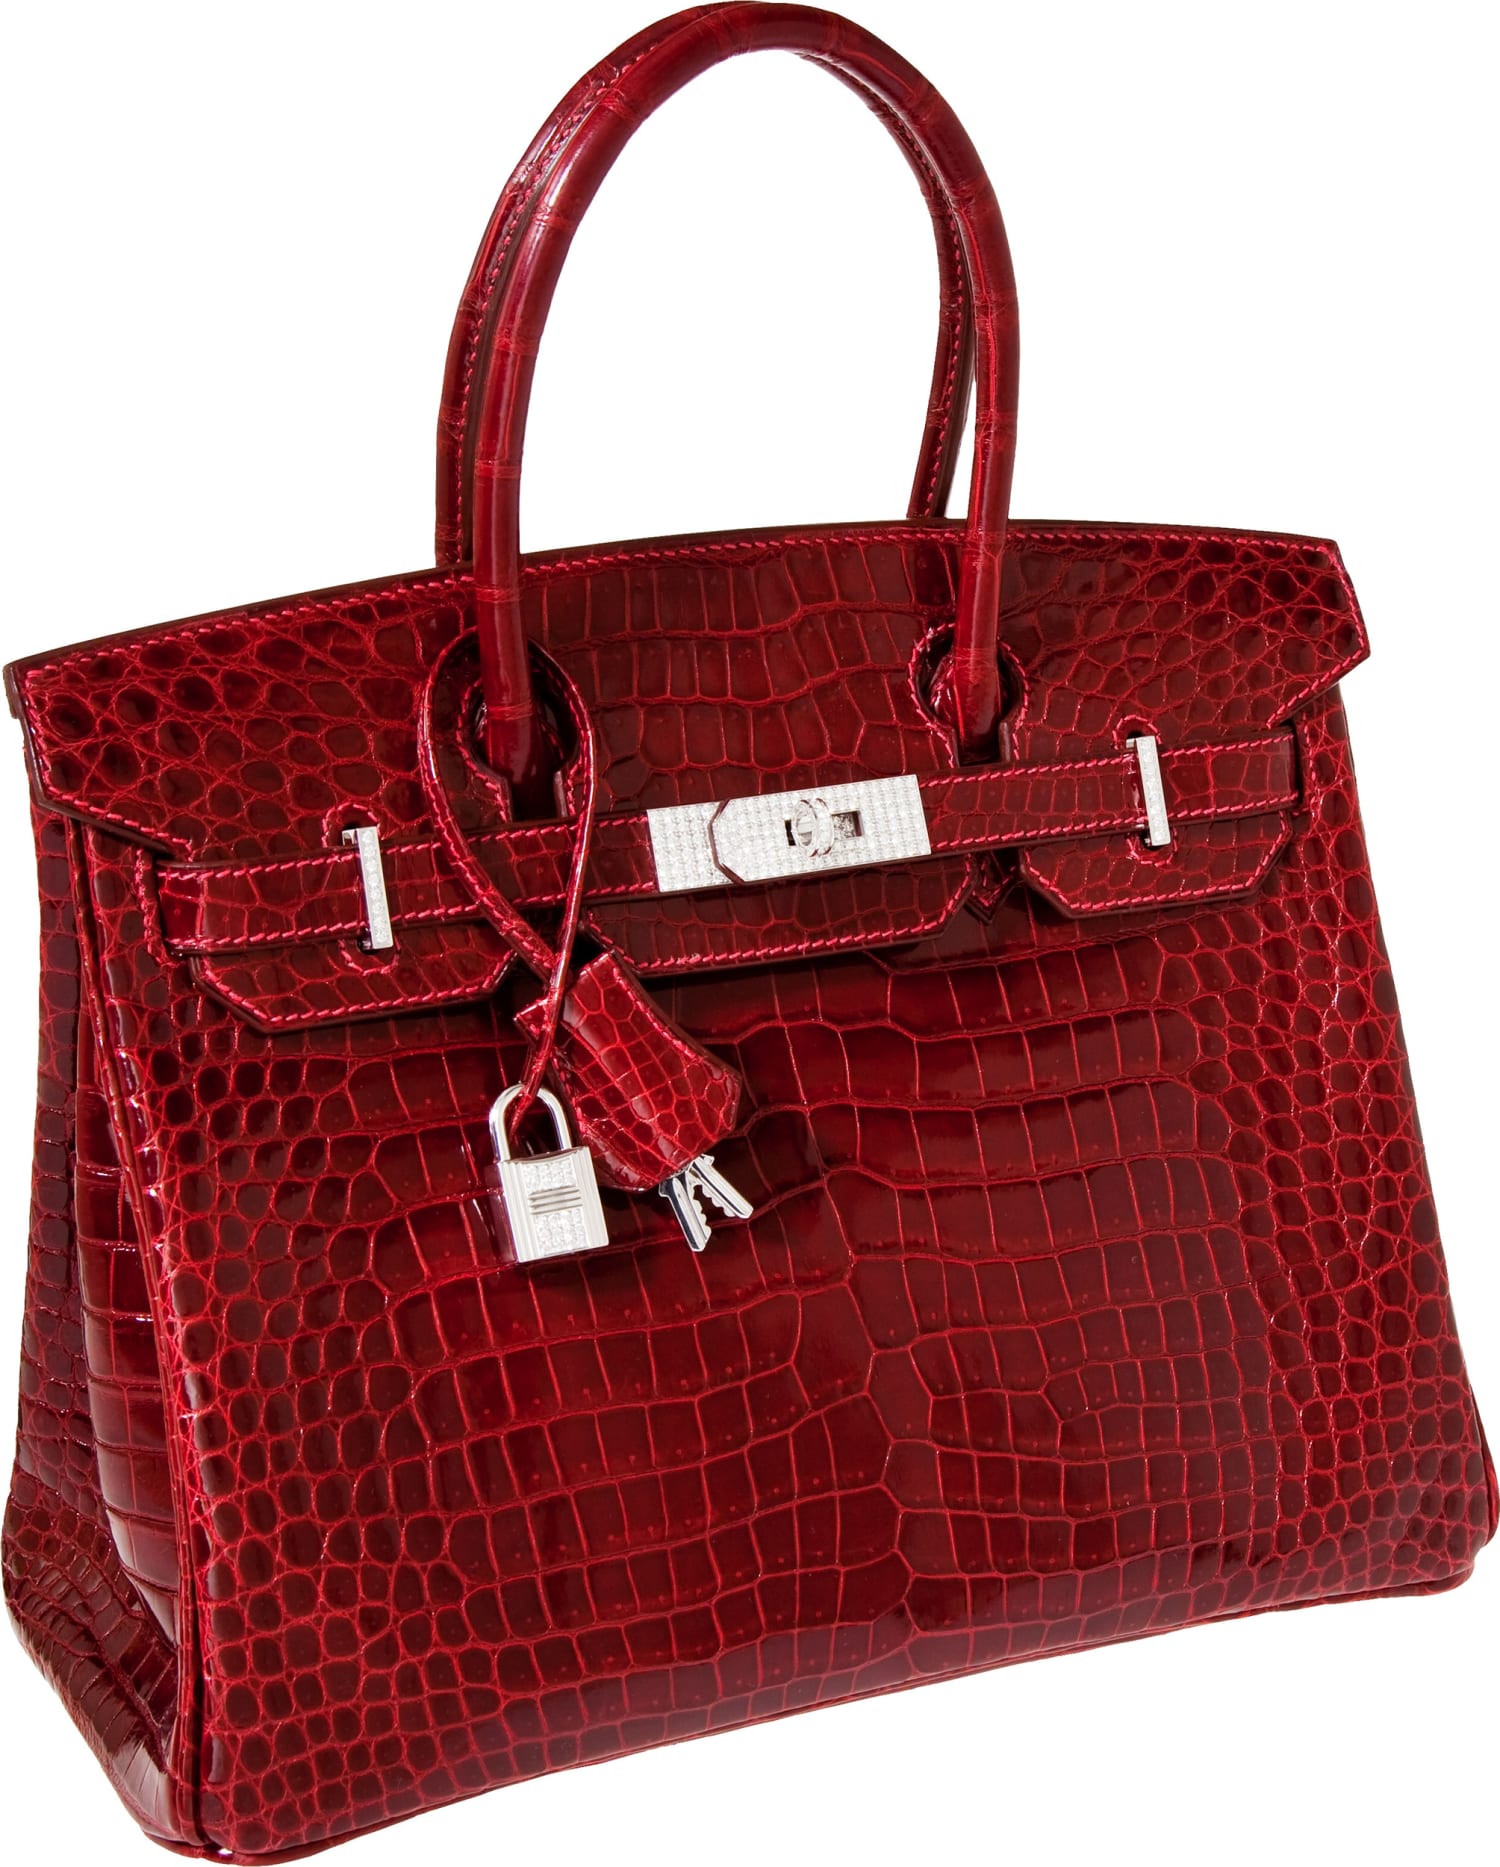 Birkin bag now better investment than gold or stocks, say insiders